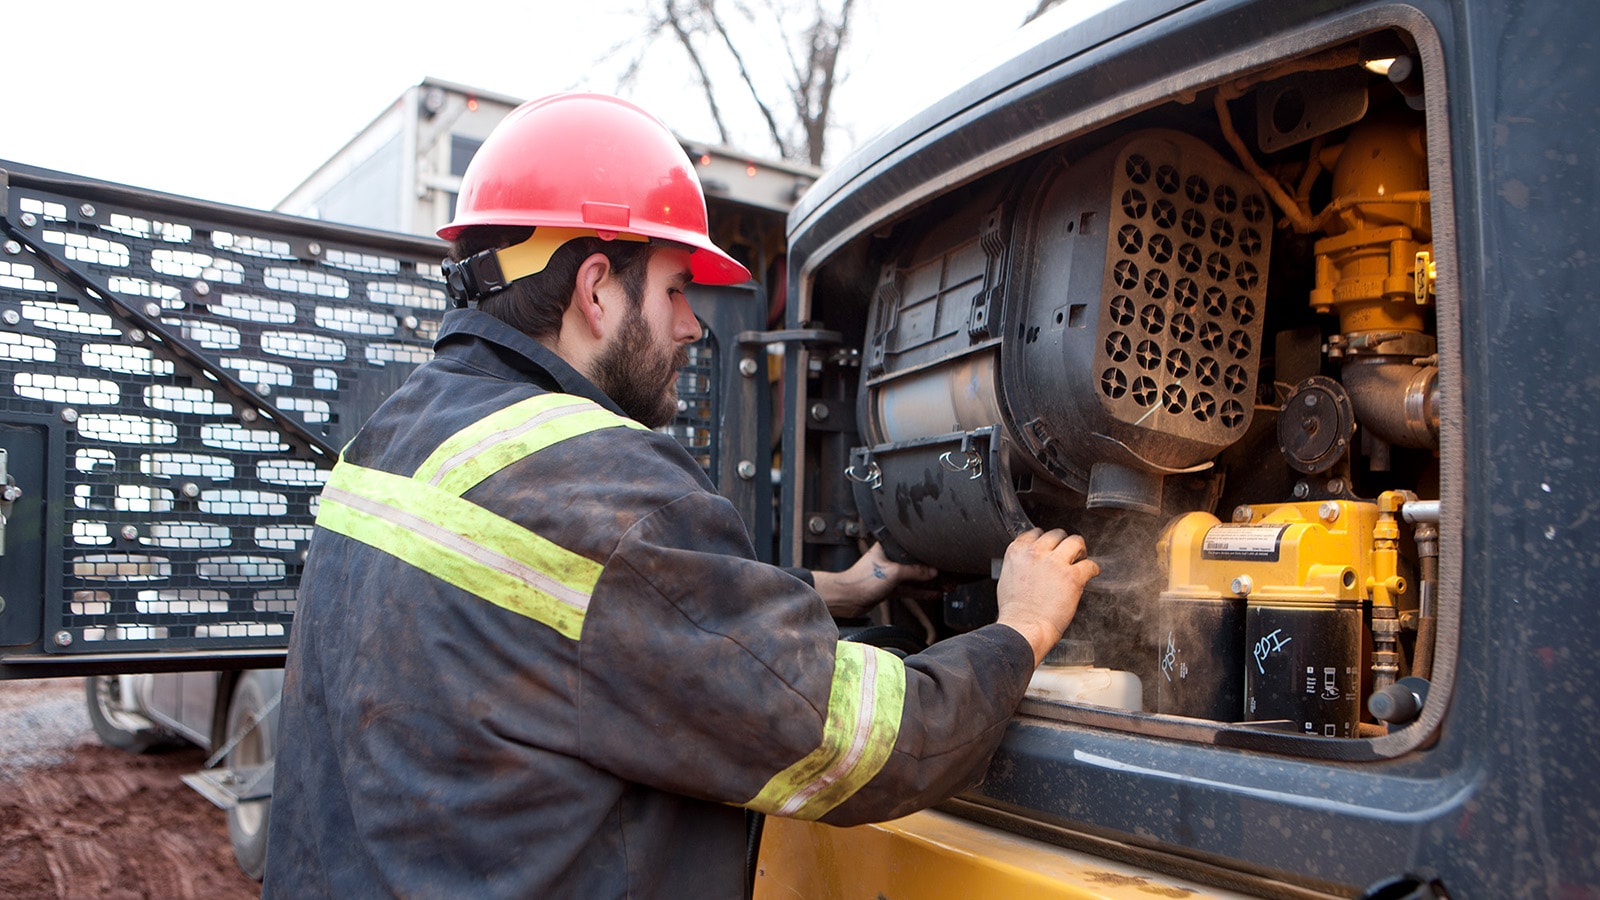 A person works inside the front service panel of an articulated dump truck